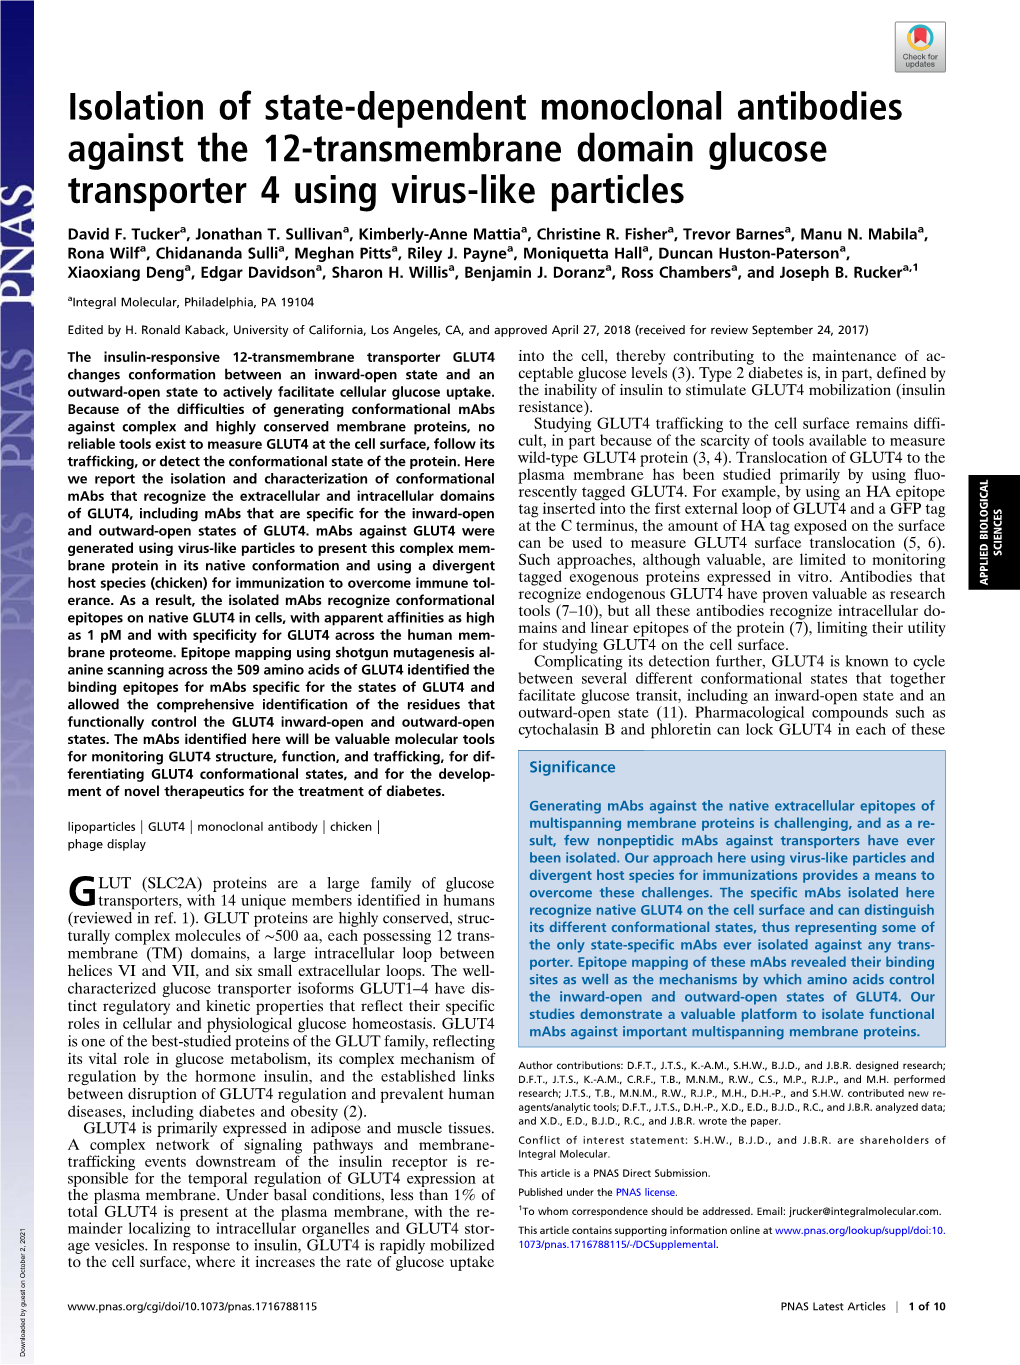 Isolation of State-Dependent Monoclonal Antibodies Against the 12-Transmembrane Domain Glucose Transporter 4 Using Virus-Like Particles